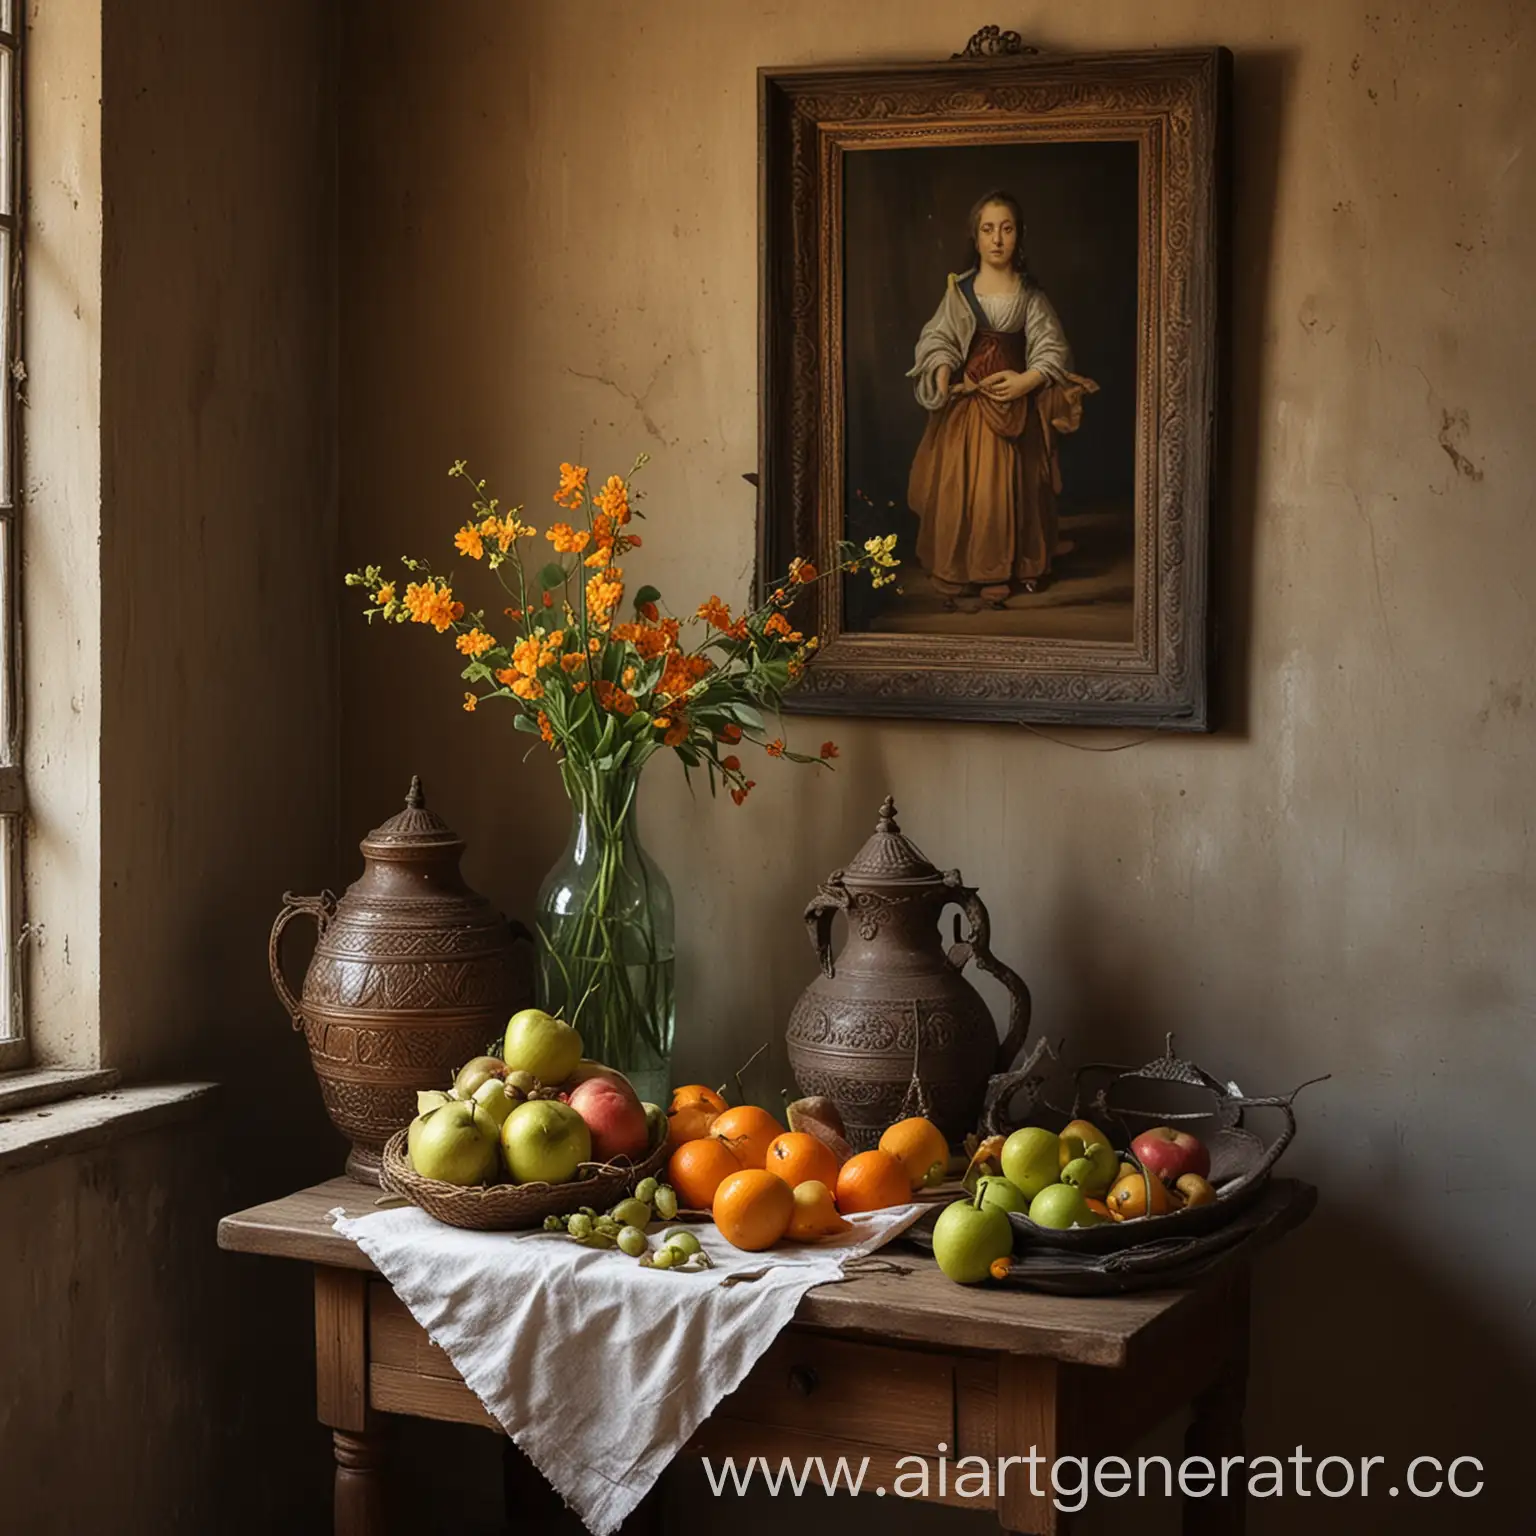 Rustic-Village-Interior-Still-Life-with-Traditional-Charm